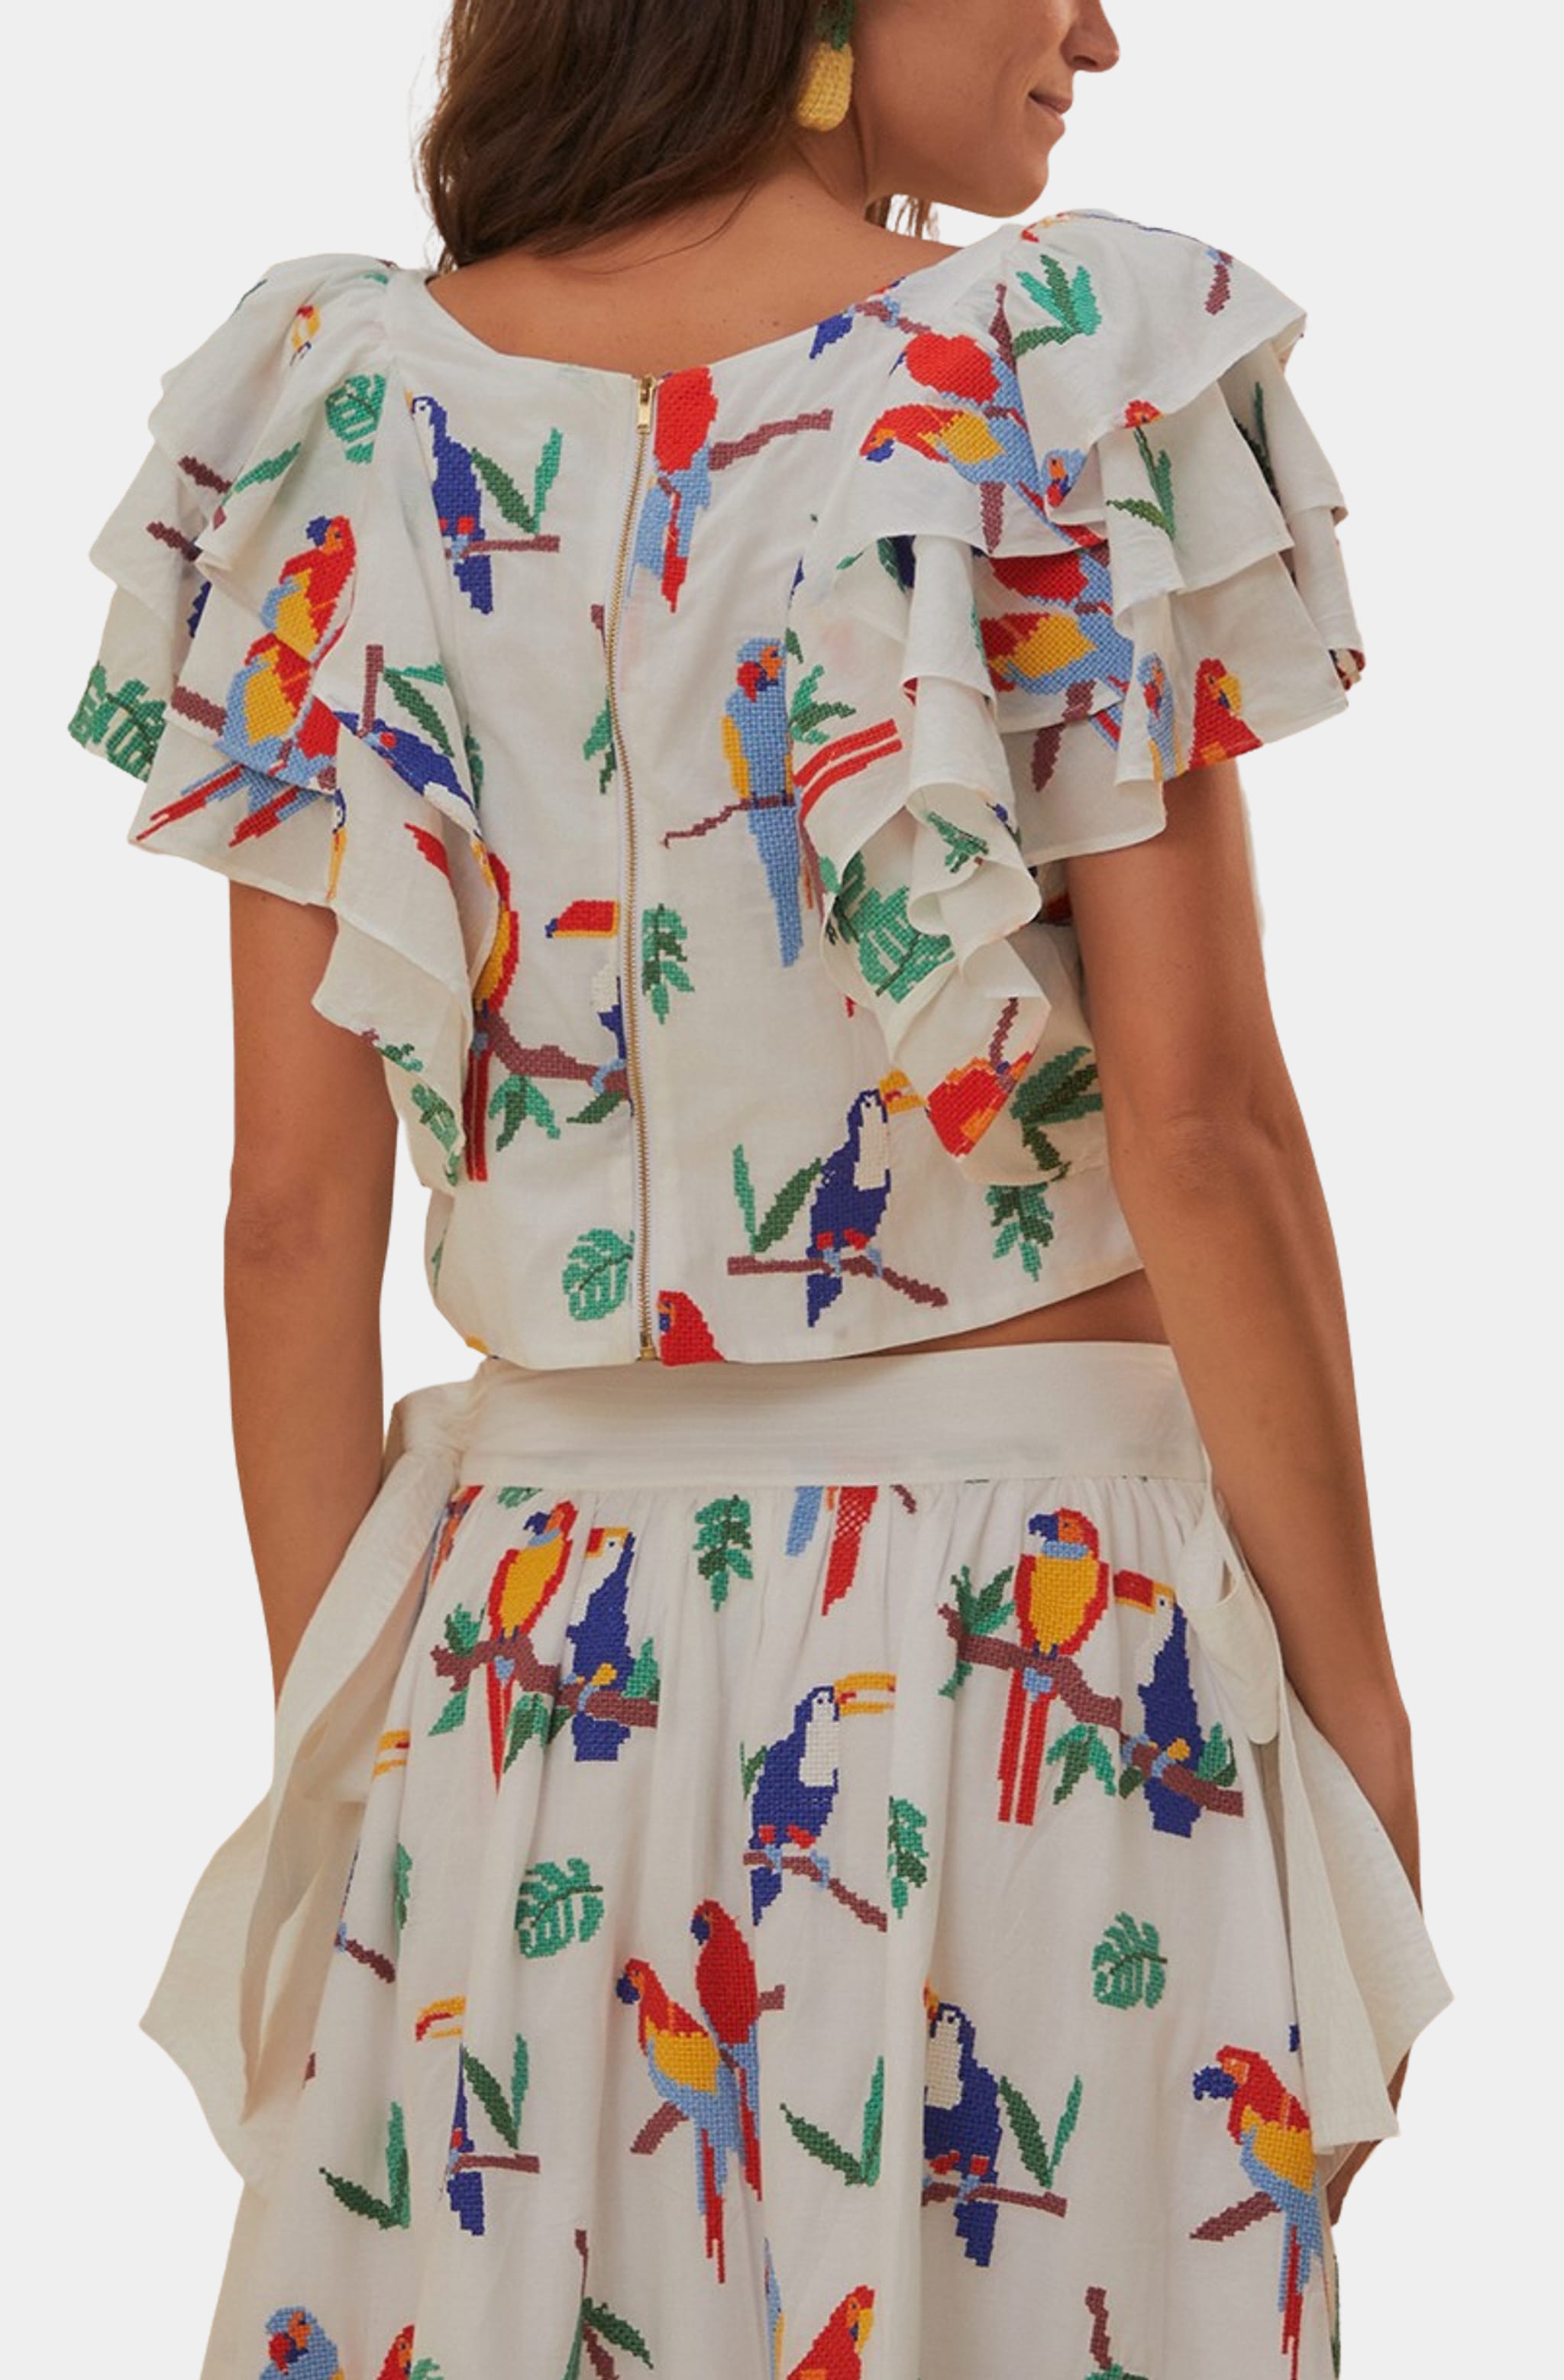 Off-White Stitched Birds Blouse Short Sleeve Top